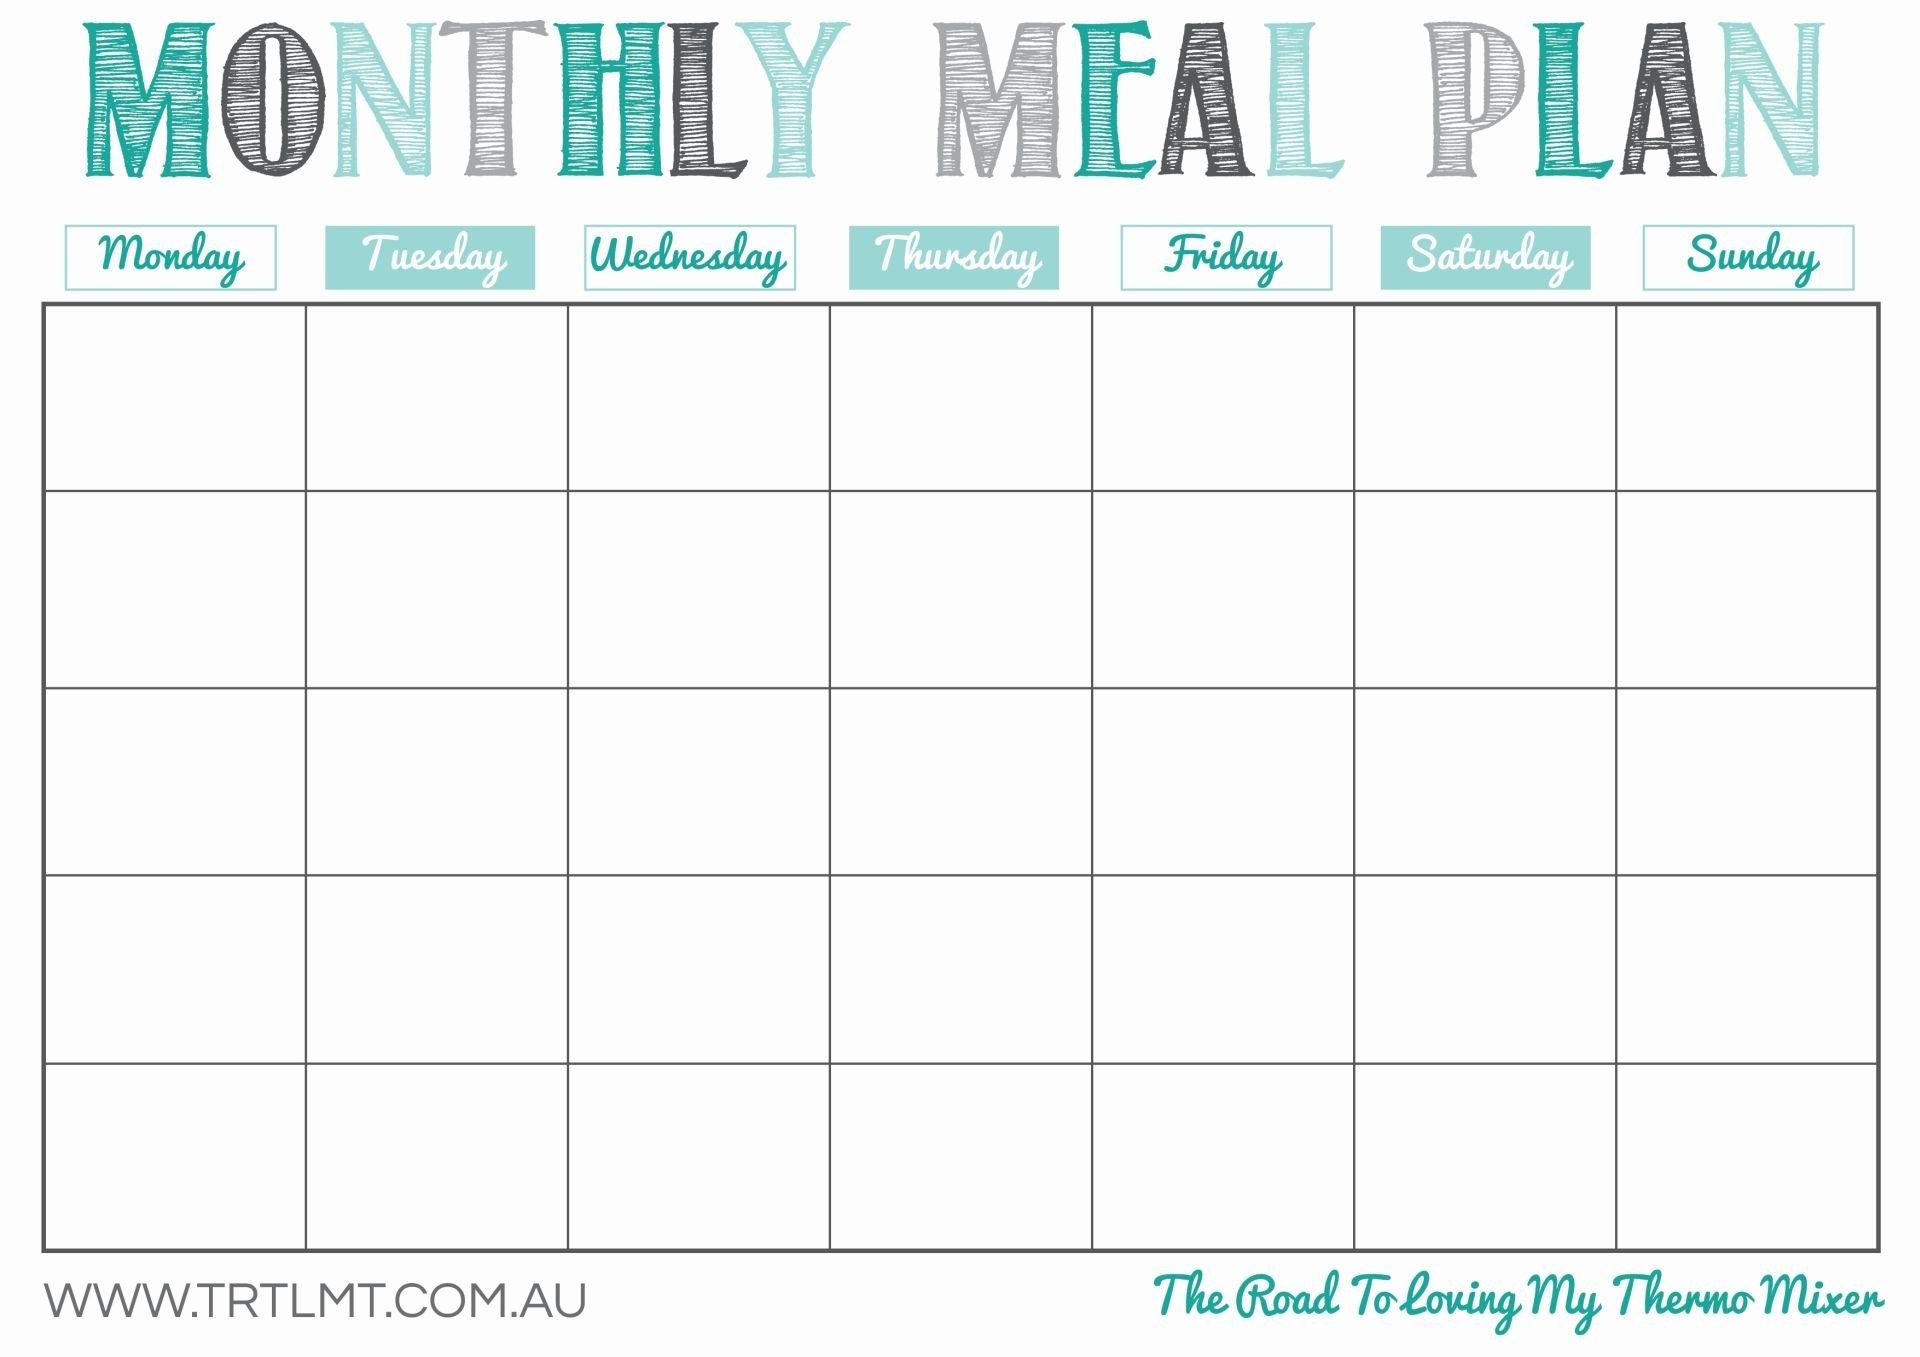 Monthly Meal Plan template printable. undated so you can use it 